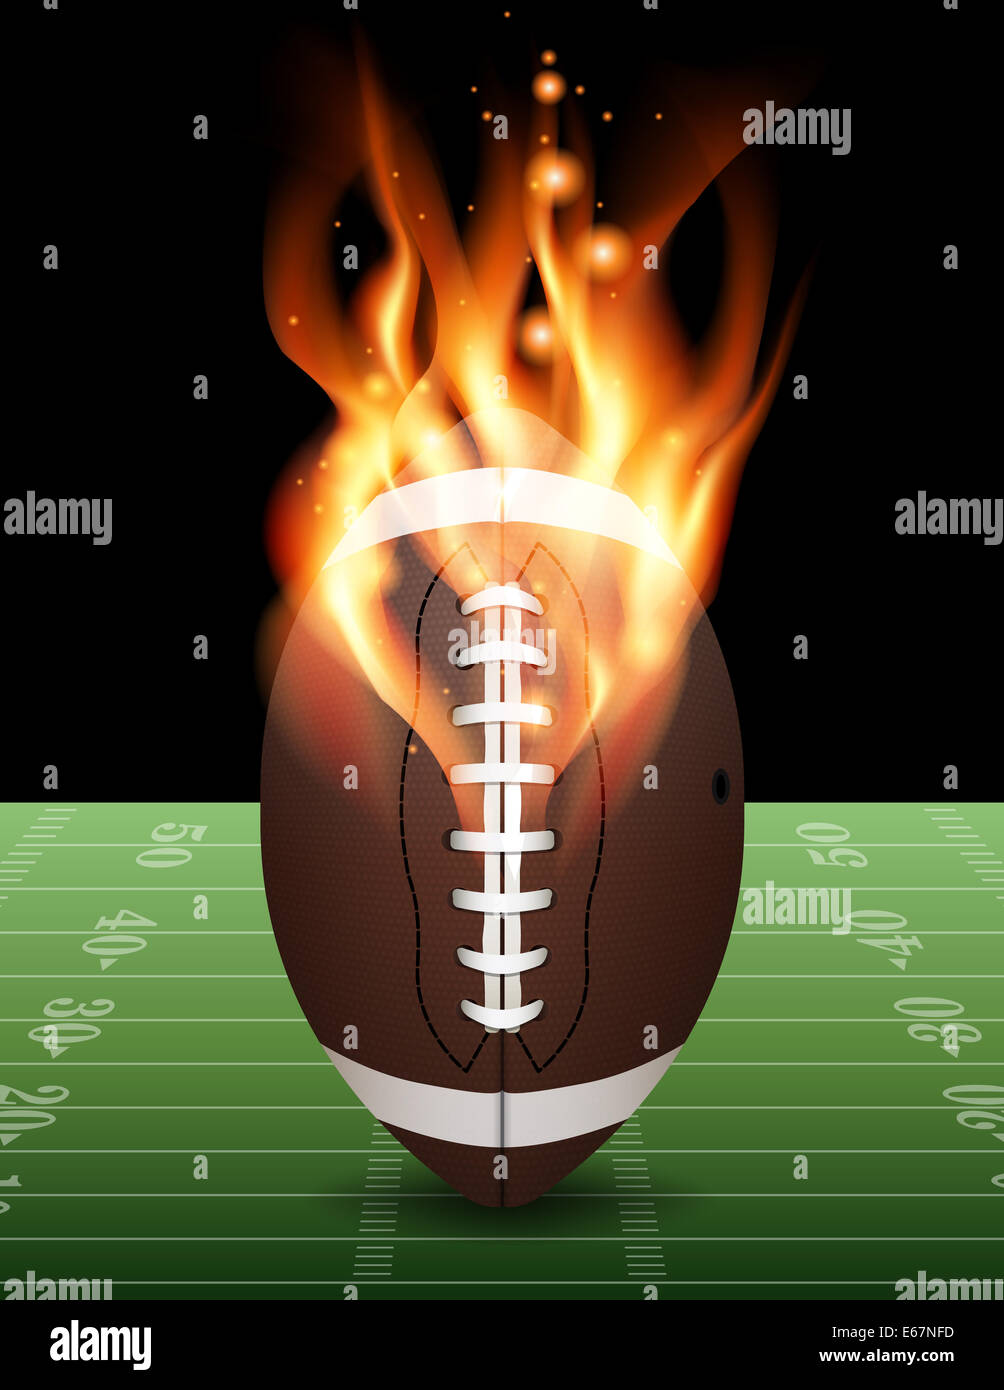 A flaming American football on field. Stock Photo